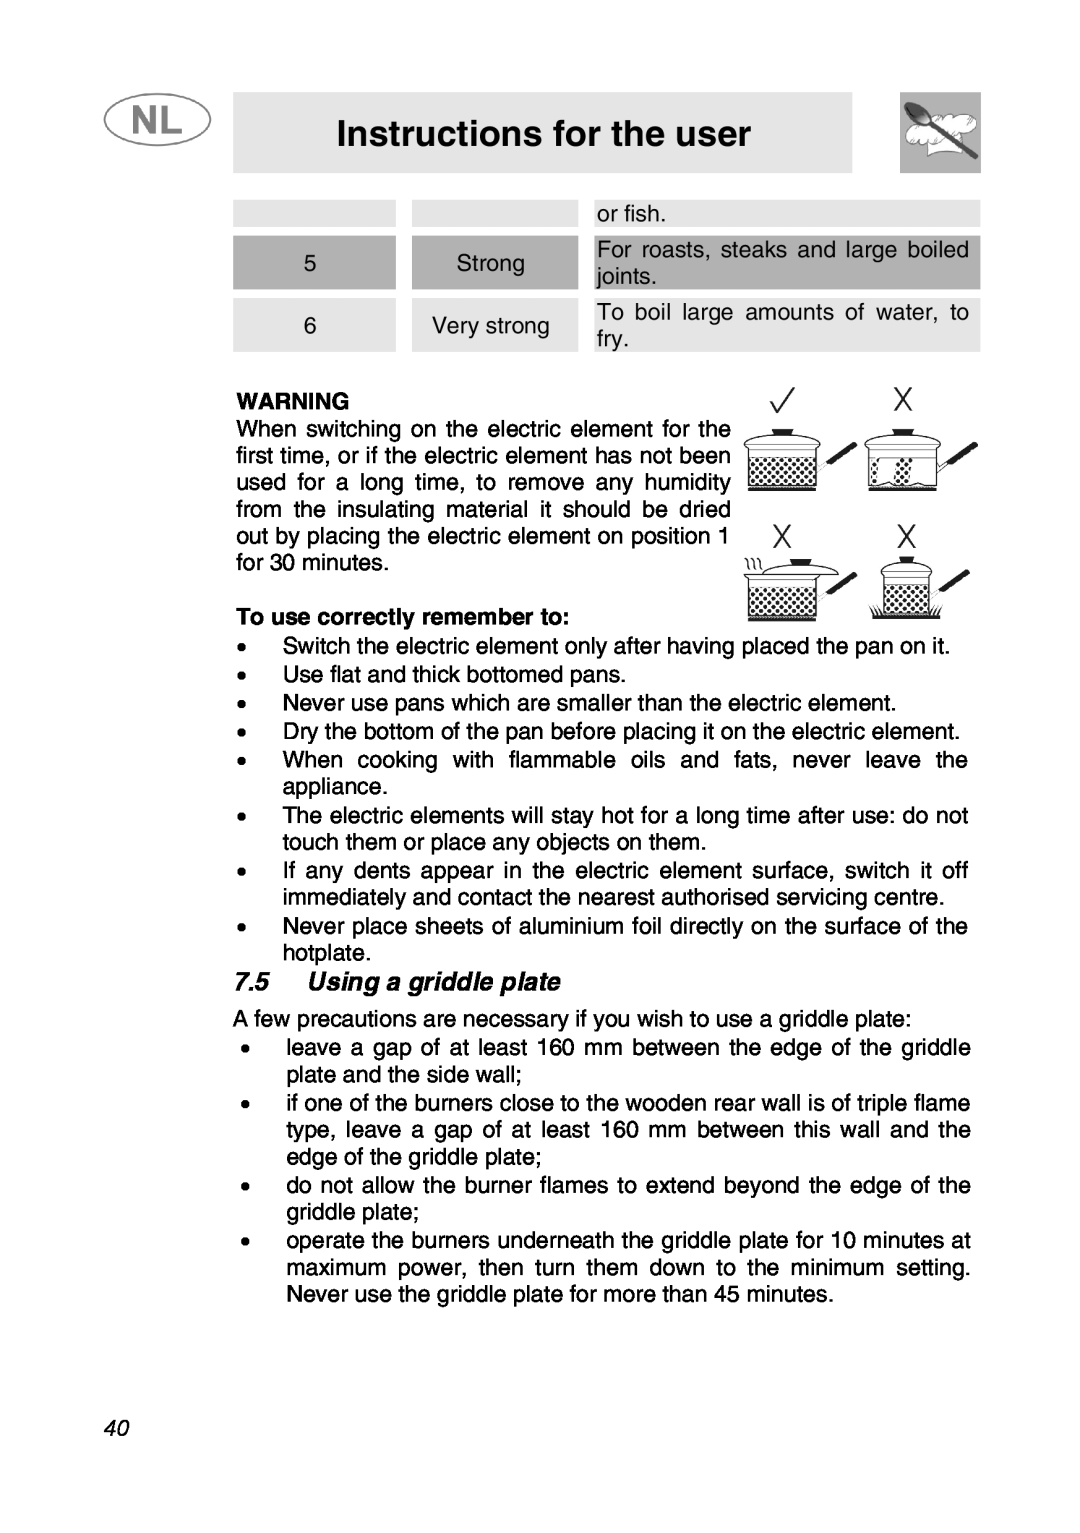 Smeg GKC95-3, GKC64-3 manual Using a griddle plate, To use correctly remember to, Instructions for the user 